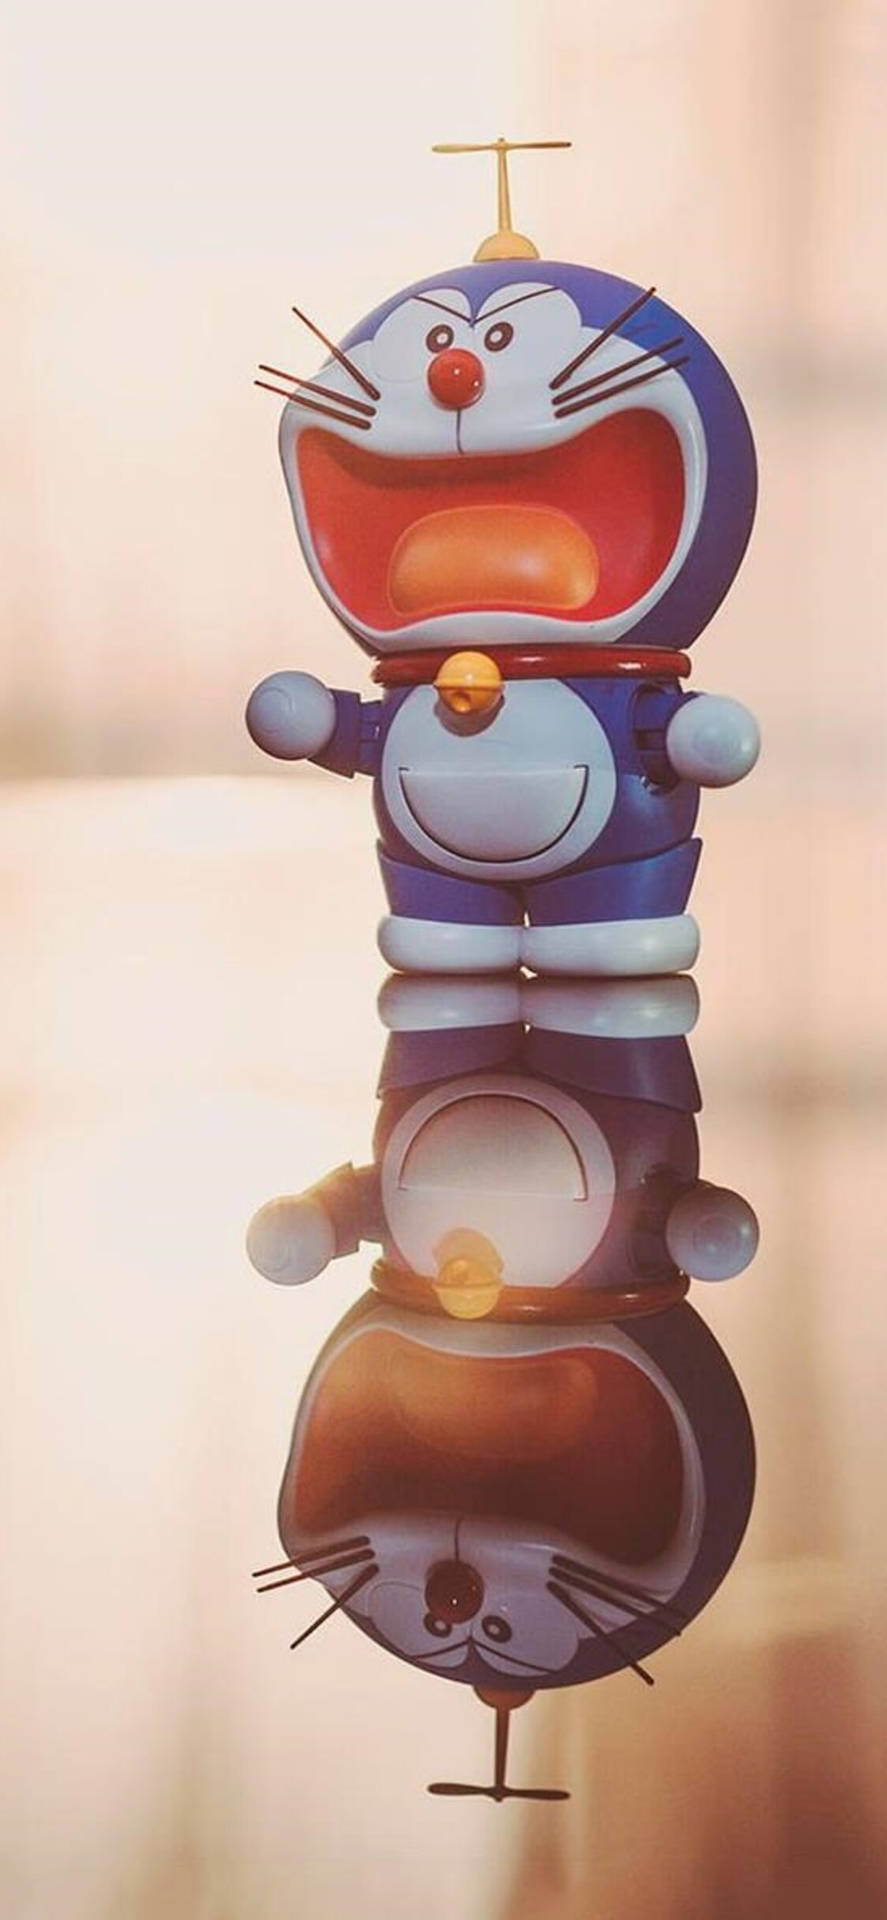 Angry Mechanical Toy Doraemon iPhone Wallpaper